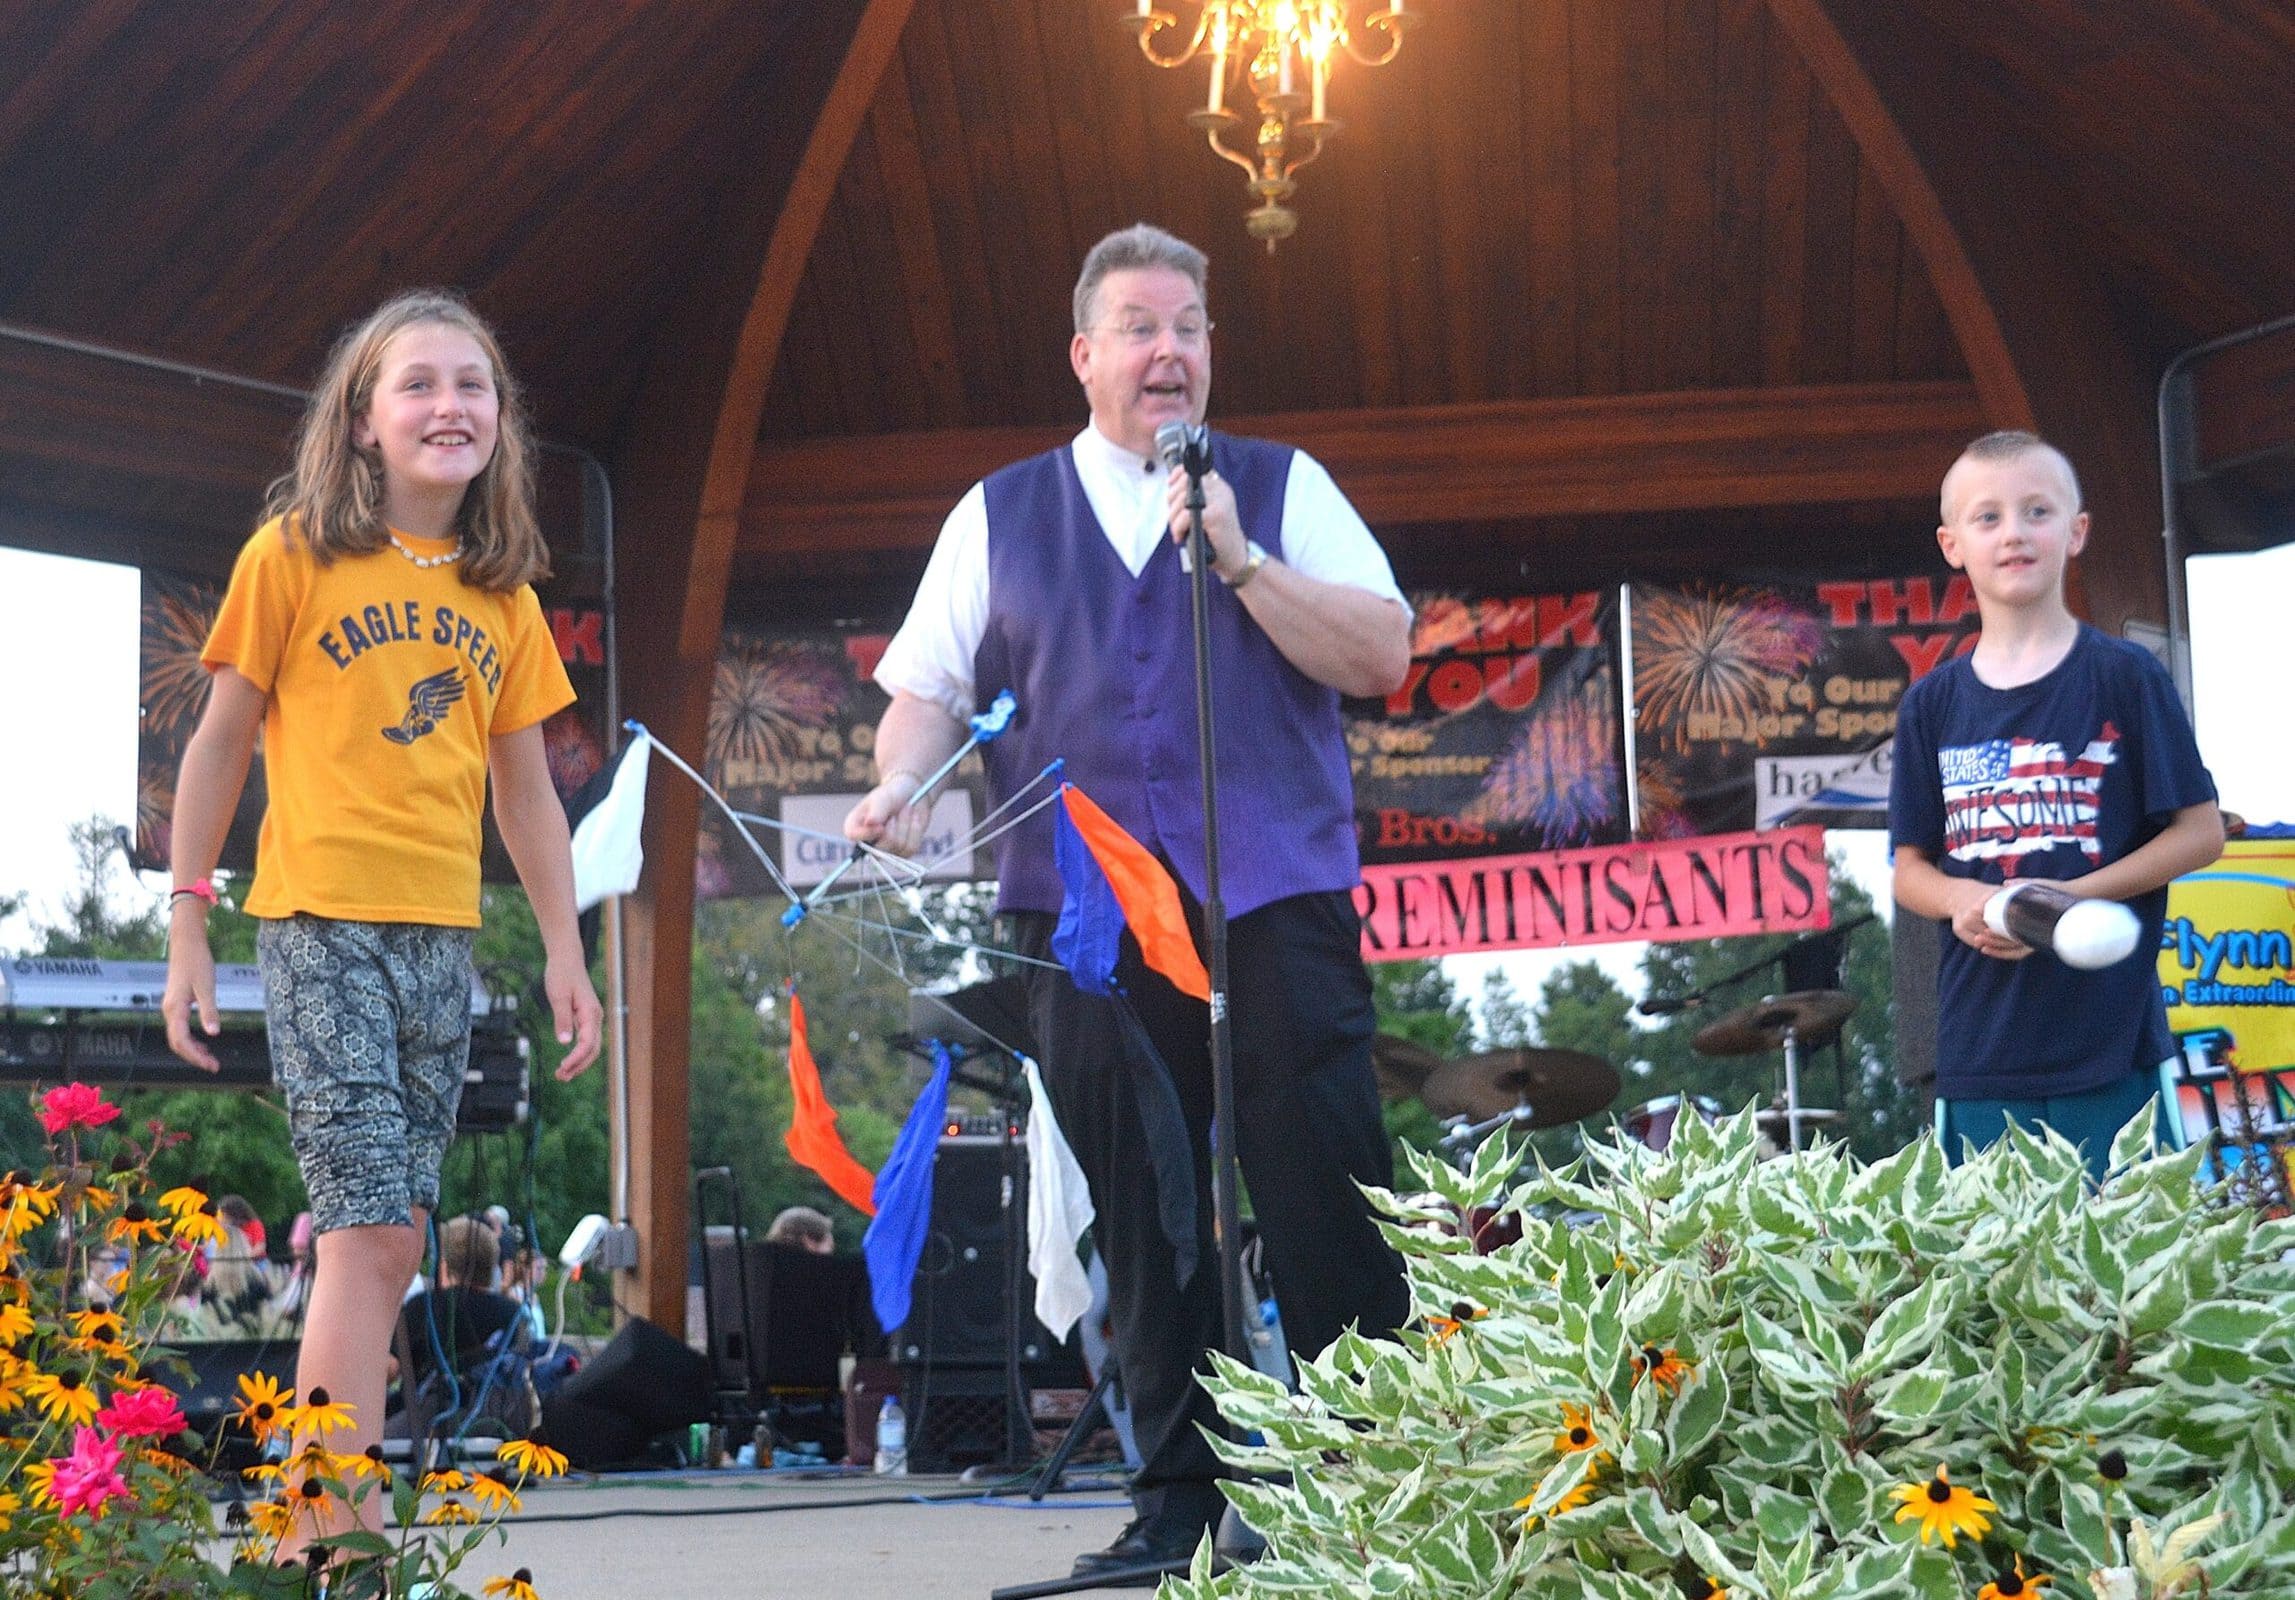 Fran Flynn (center) performs his magic show with volunteer assistants (l to r) Charlotte Erickson, 10, and Jack Steakus, 7.